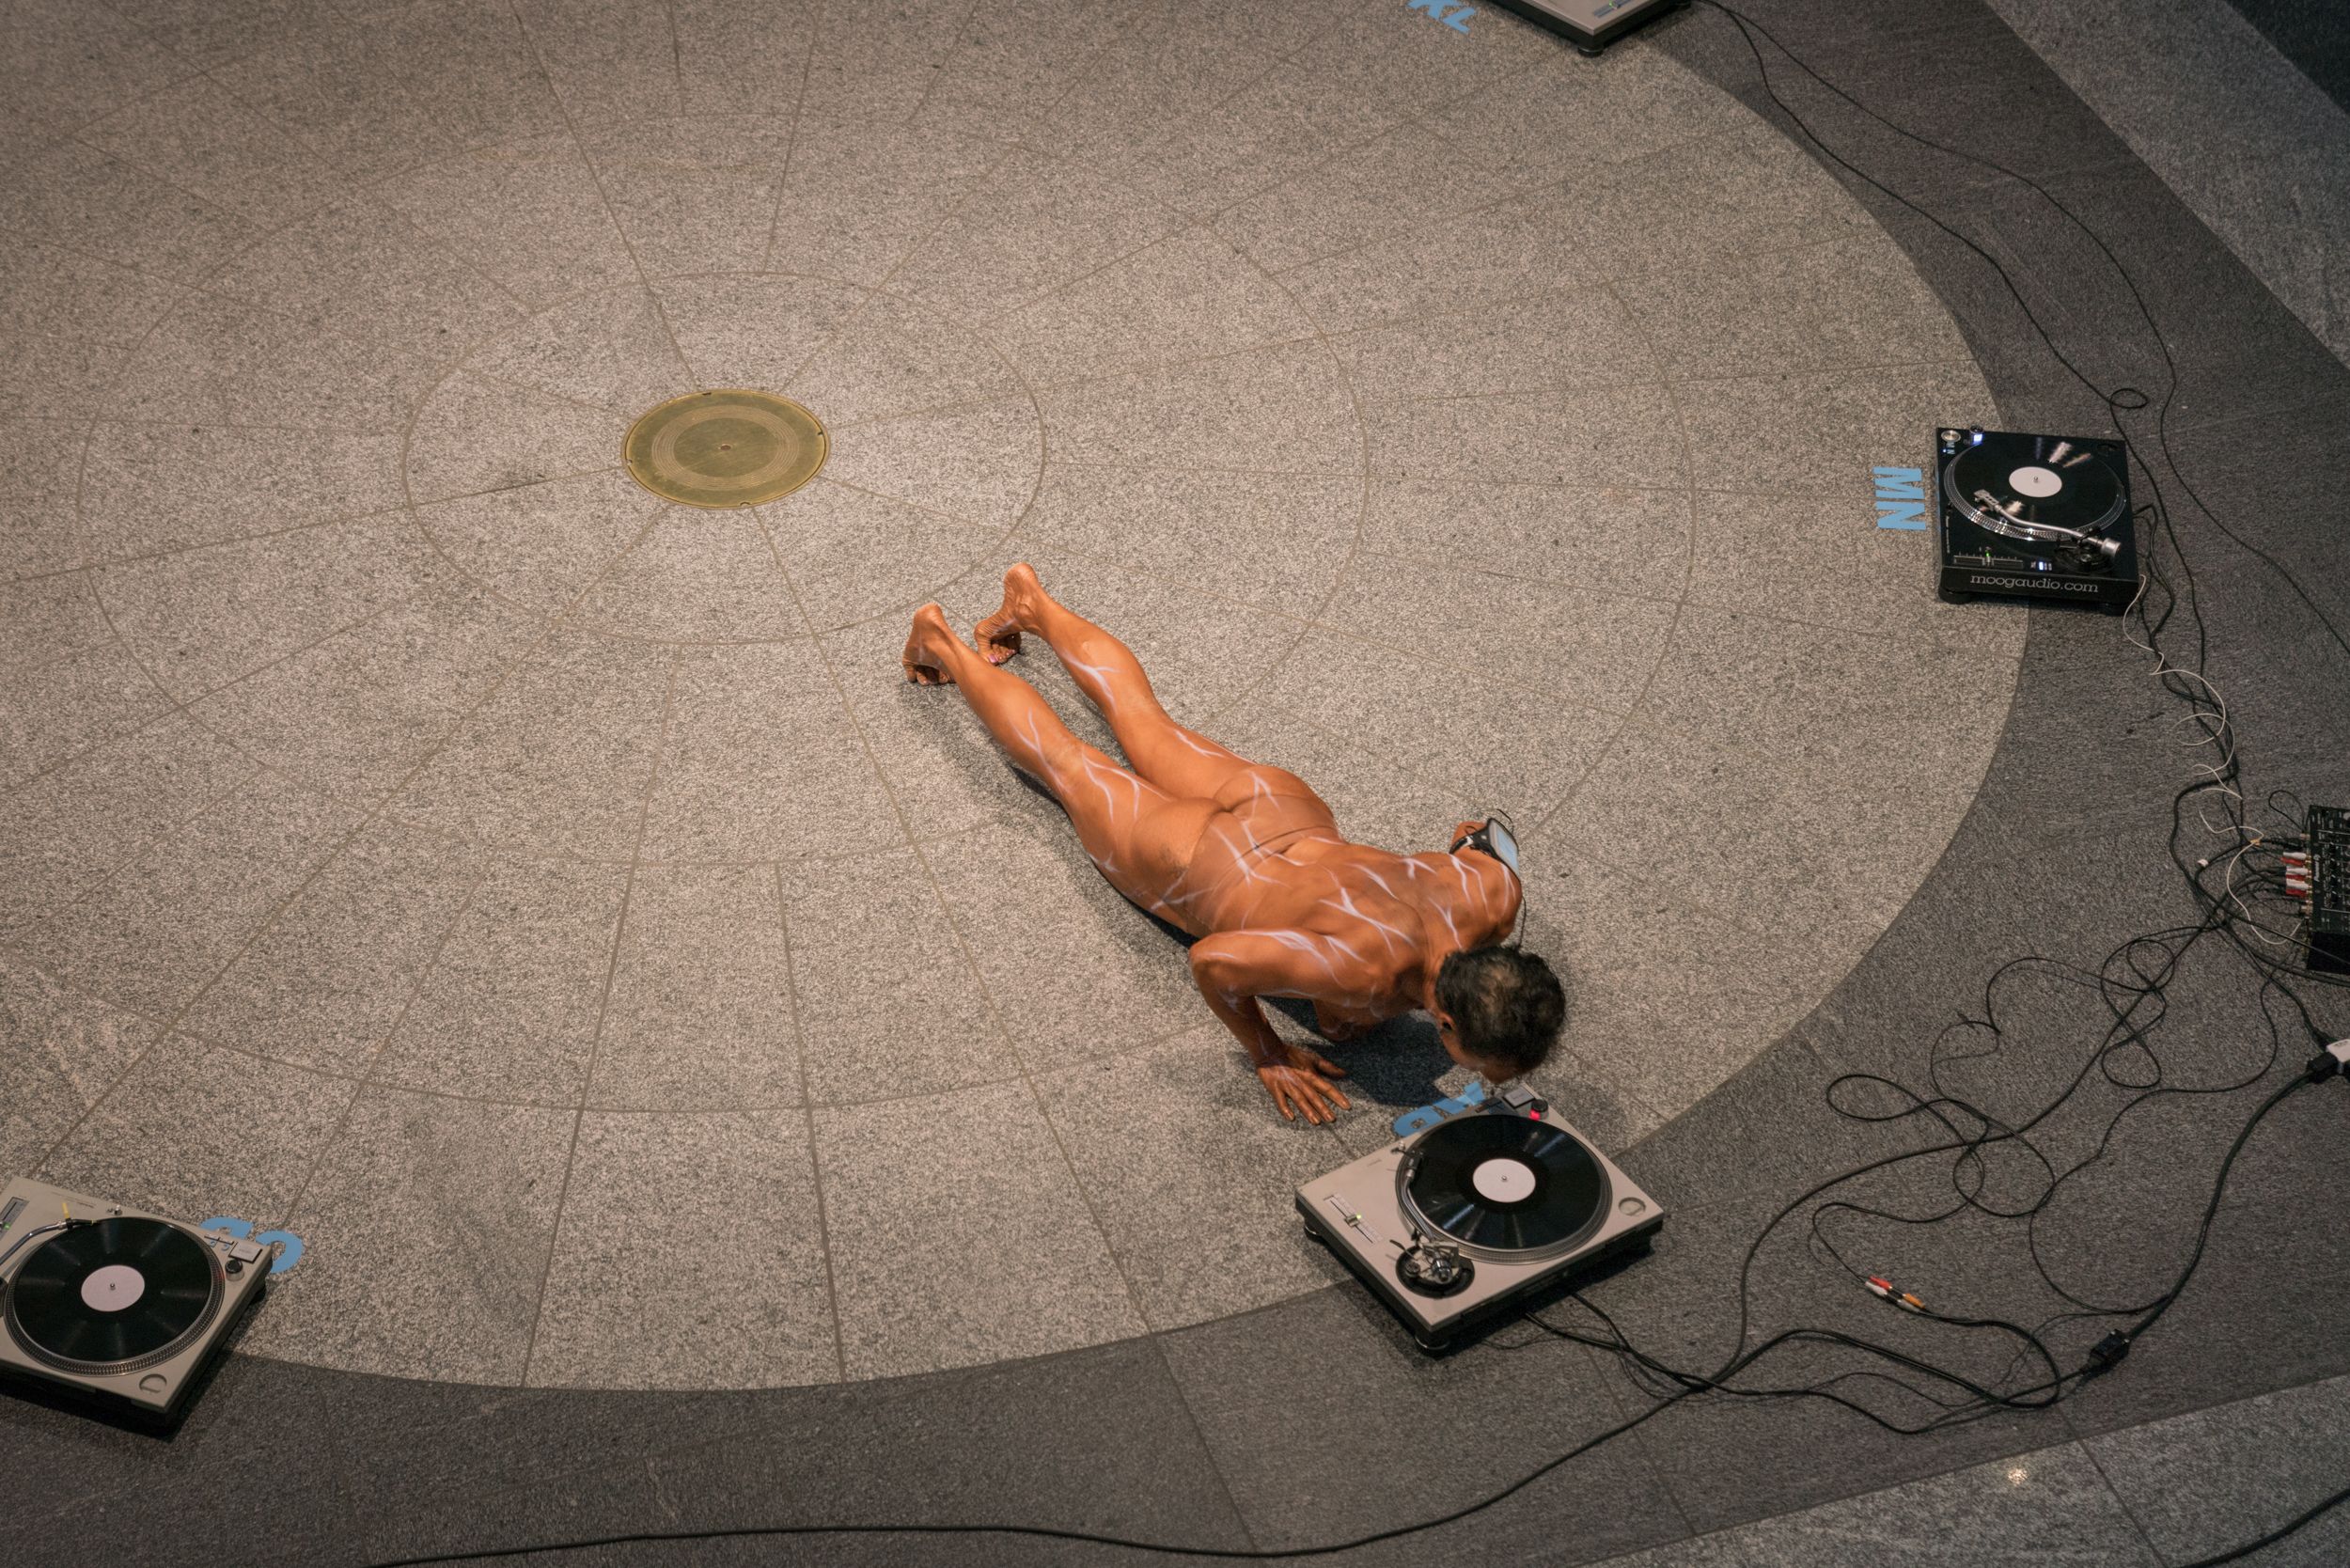 Female bodybuilder performing with record player for PPKK 04.01 by Sarah Ancelle Schoenfeld and Louis-Philippe Scoufaras at Emerge MAC Montreal